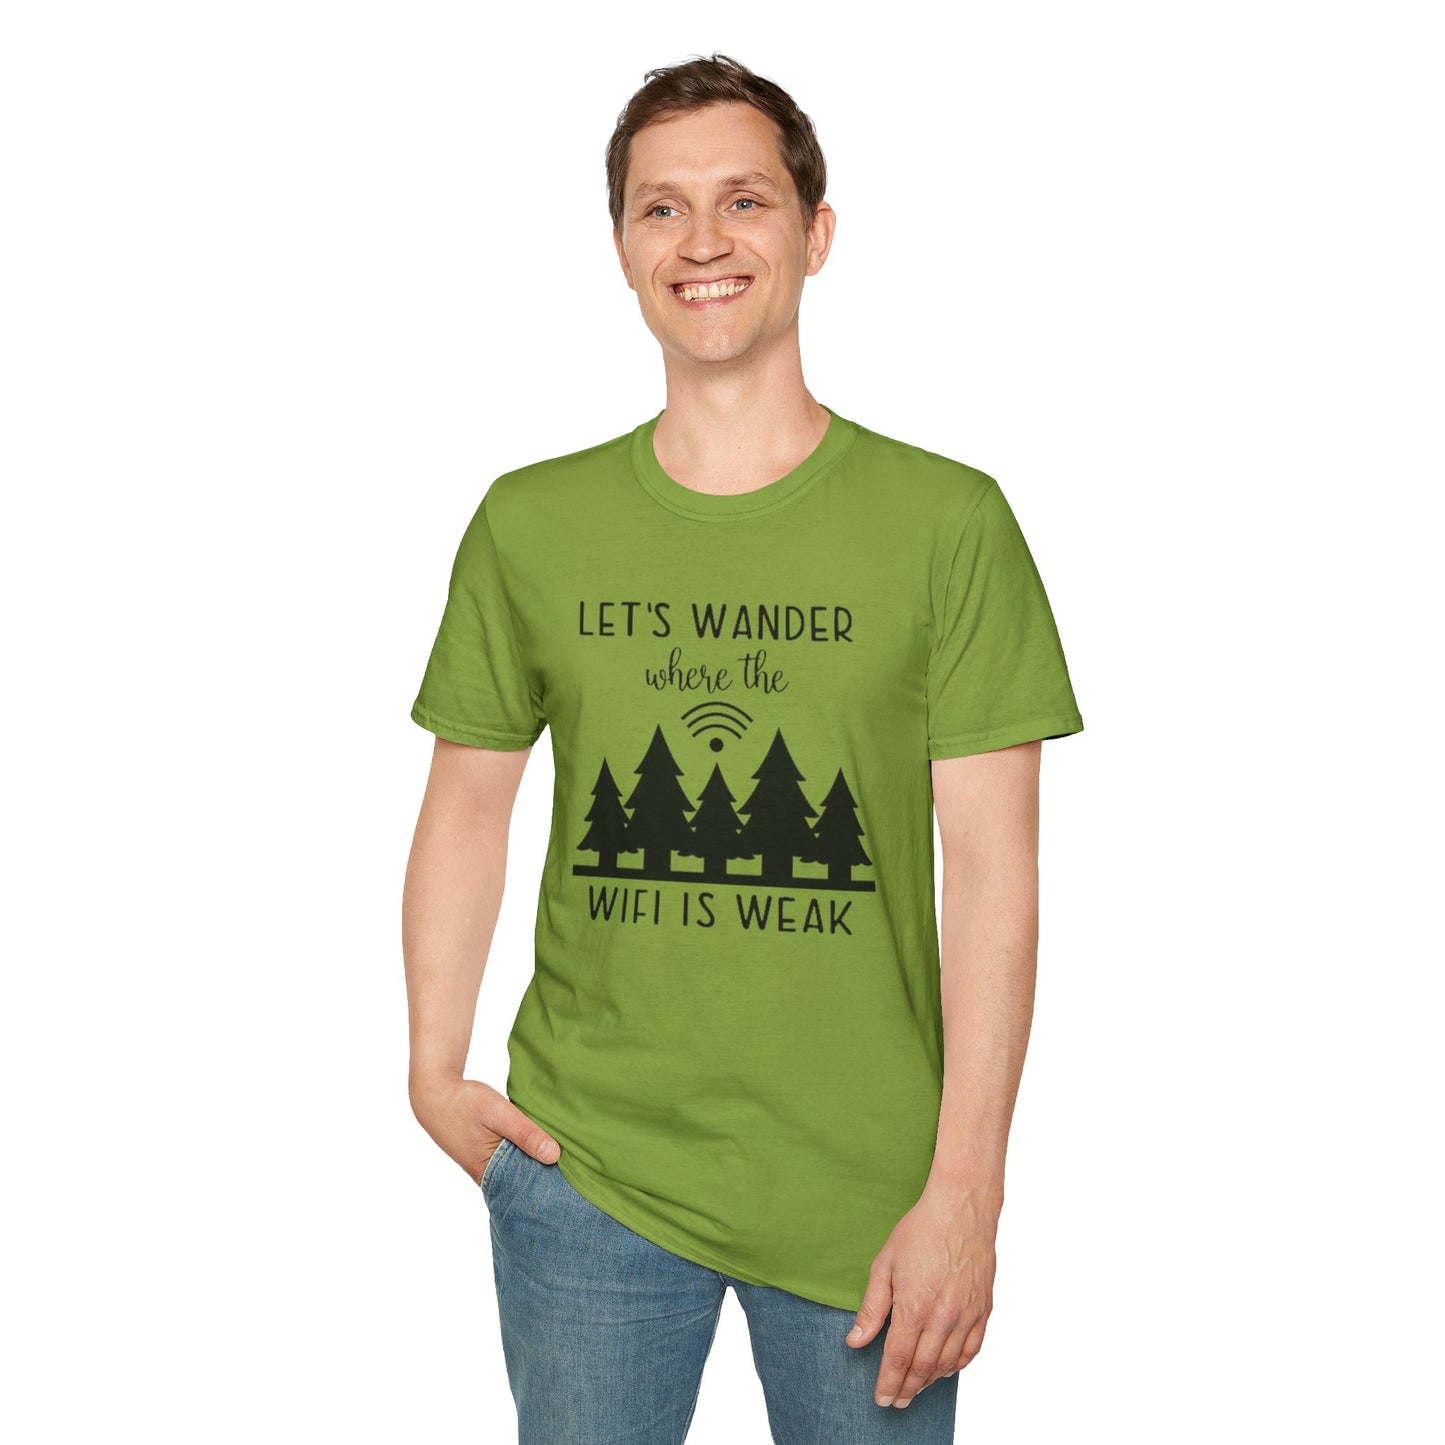 Lets wander where the WIFI is weak - Unisex Softstyle T-Shirt